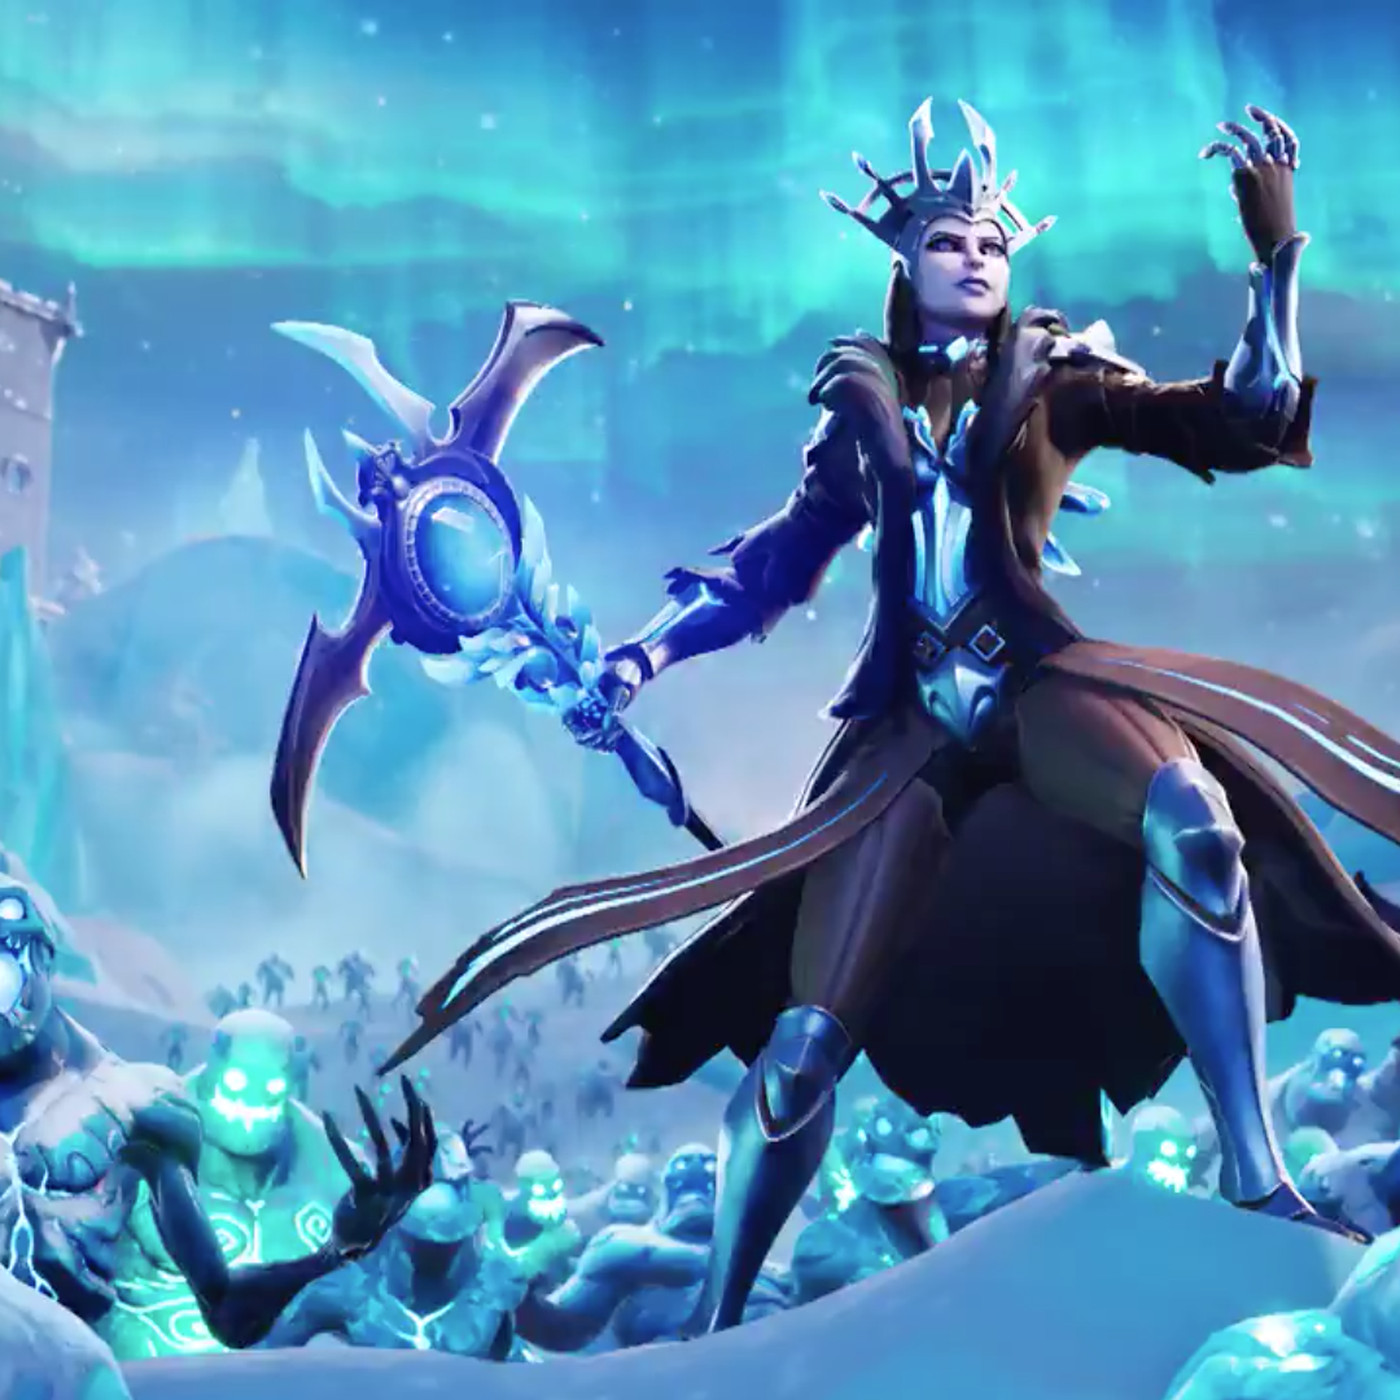 Fortnite S Ice Storm Eth King Dumps Blizzard On The Whole